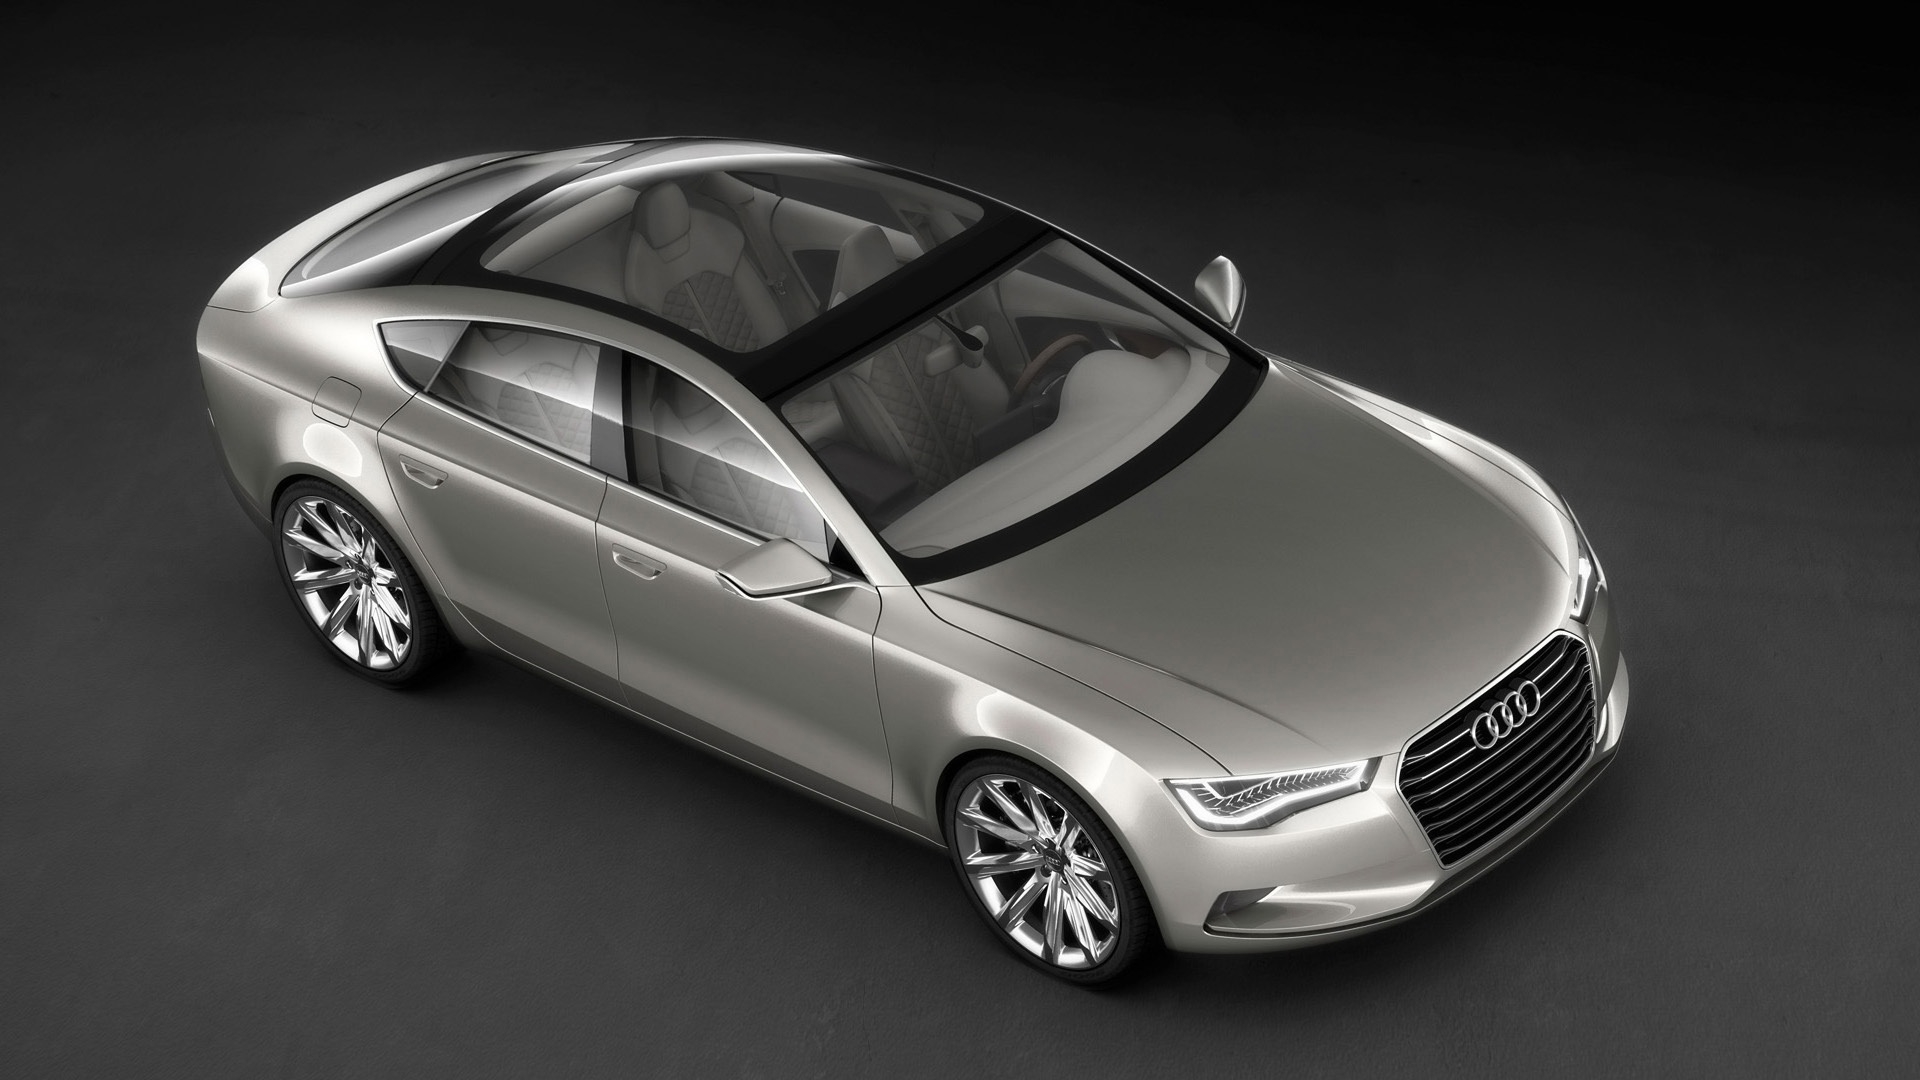 2009 Audi Sportback Concept - Front And Side Top for 1920 x 1080 HDTV 1080p resolution